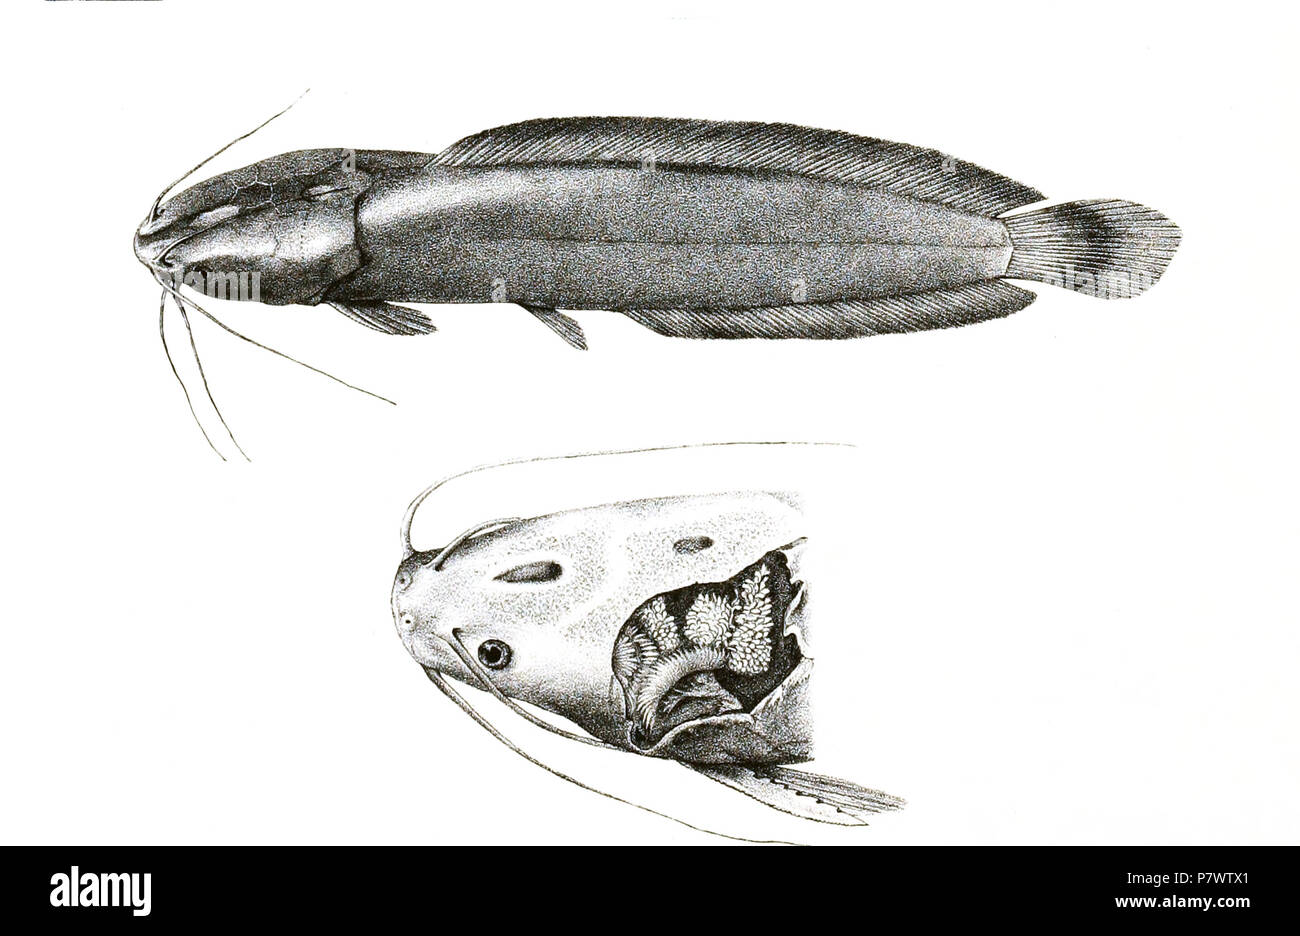 The species names / identity need verification - original names from plate are included here. The original plates showed the fishes facing right and have been flipped here. Clarias magur . 1878 92 Clarias magur Mintern 112 Stock Photo